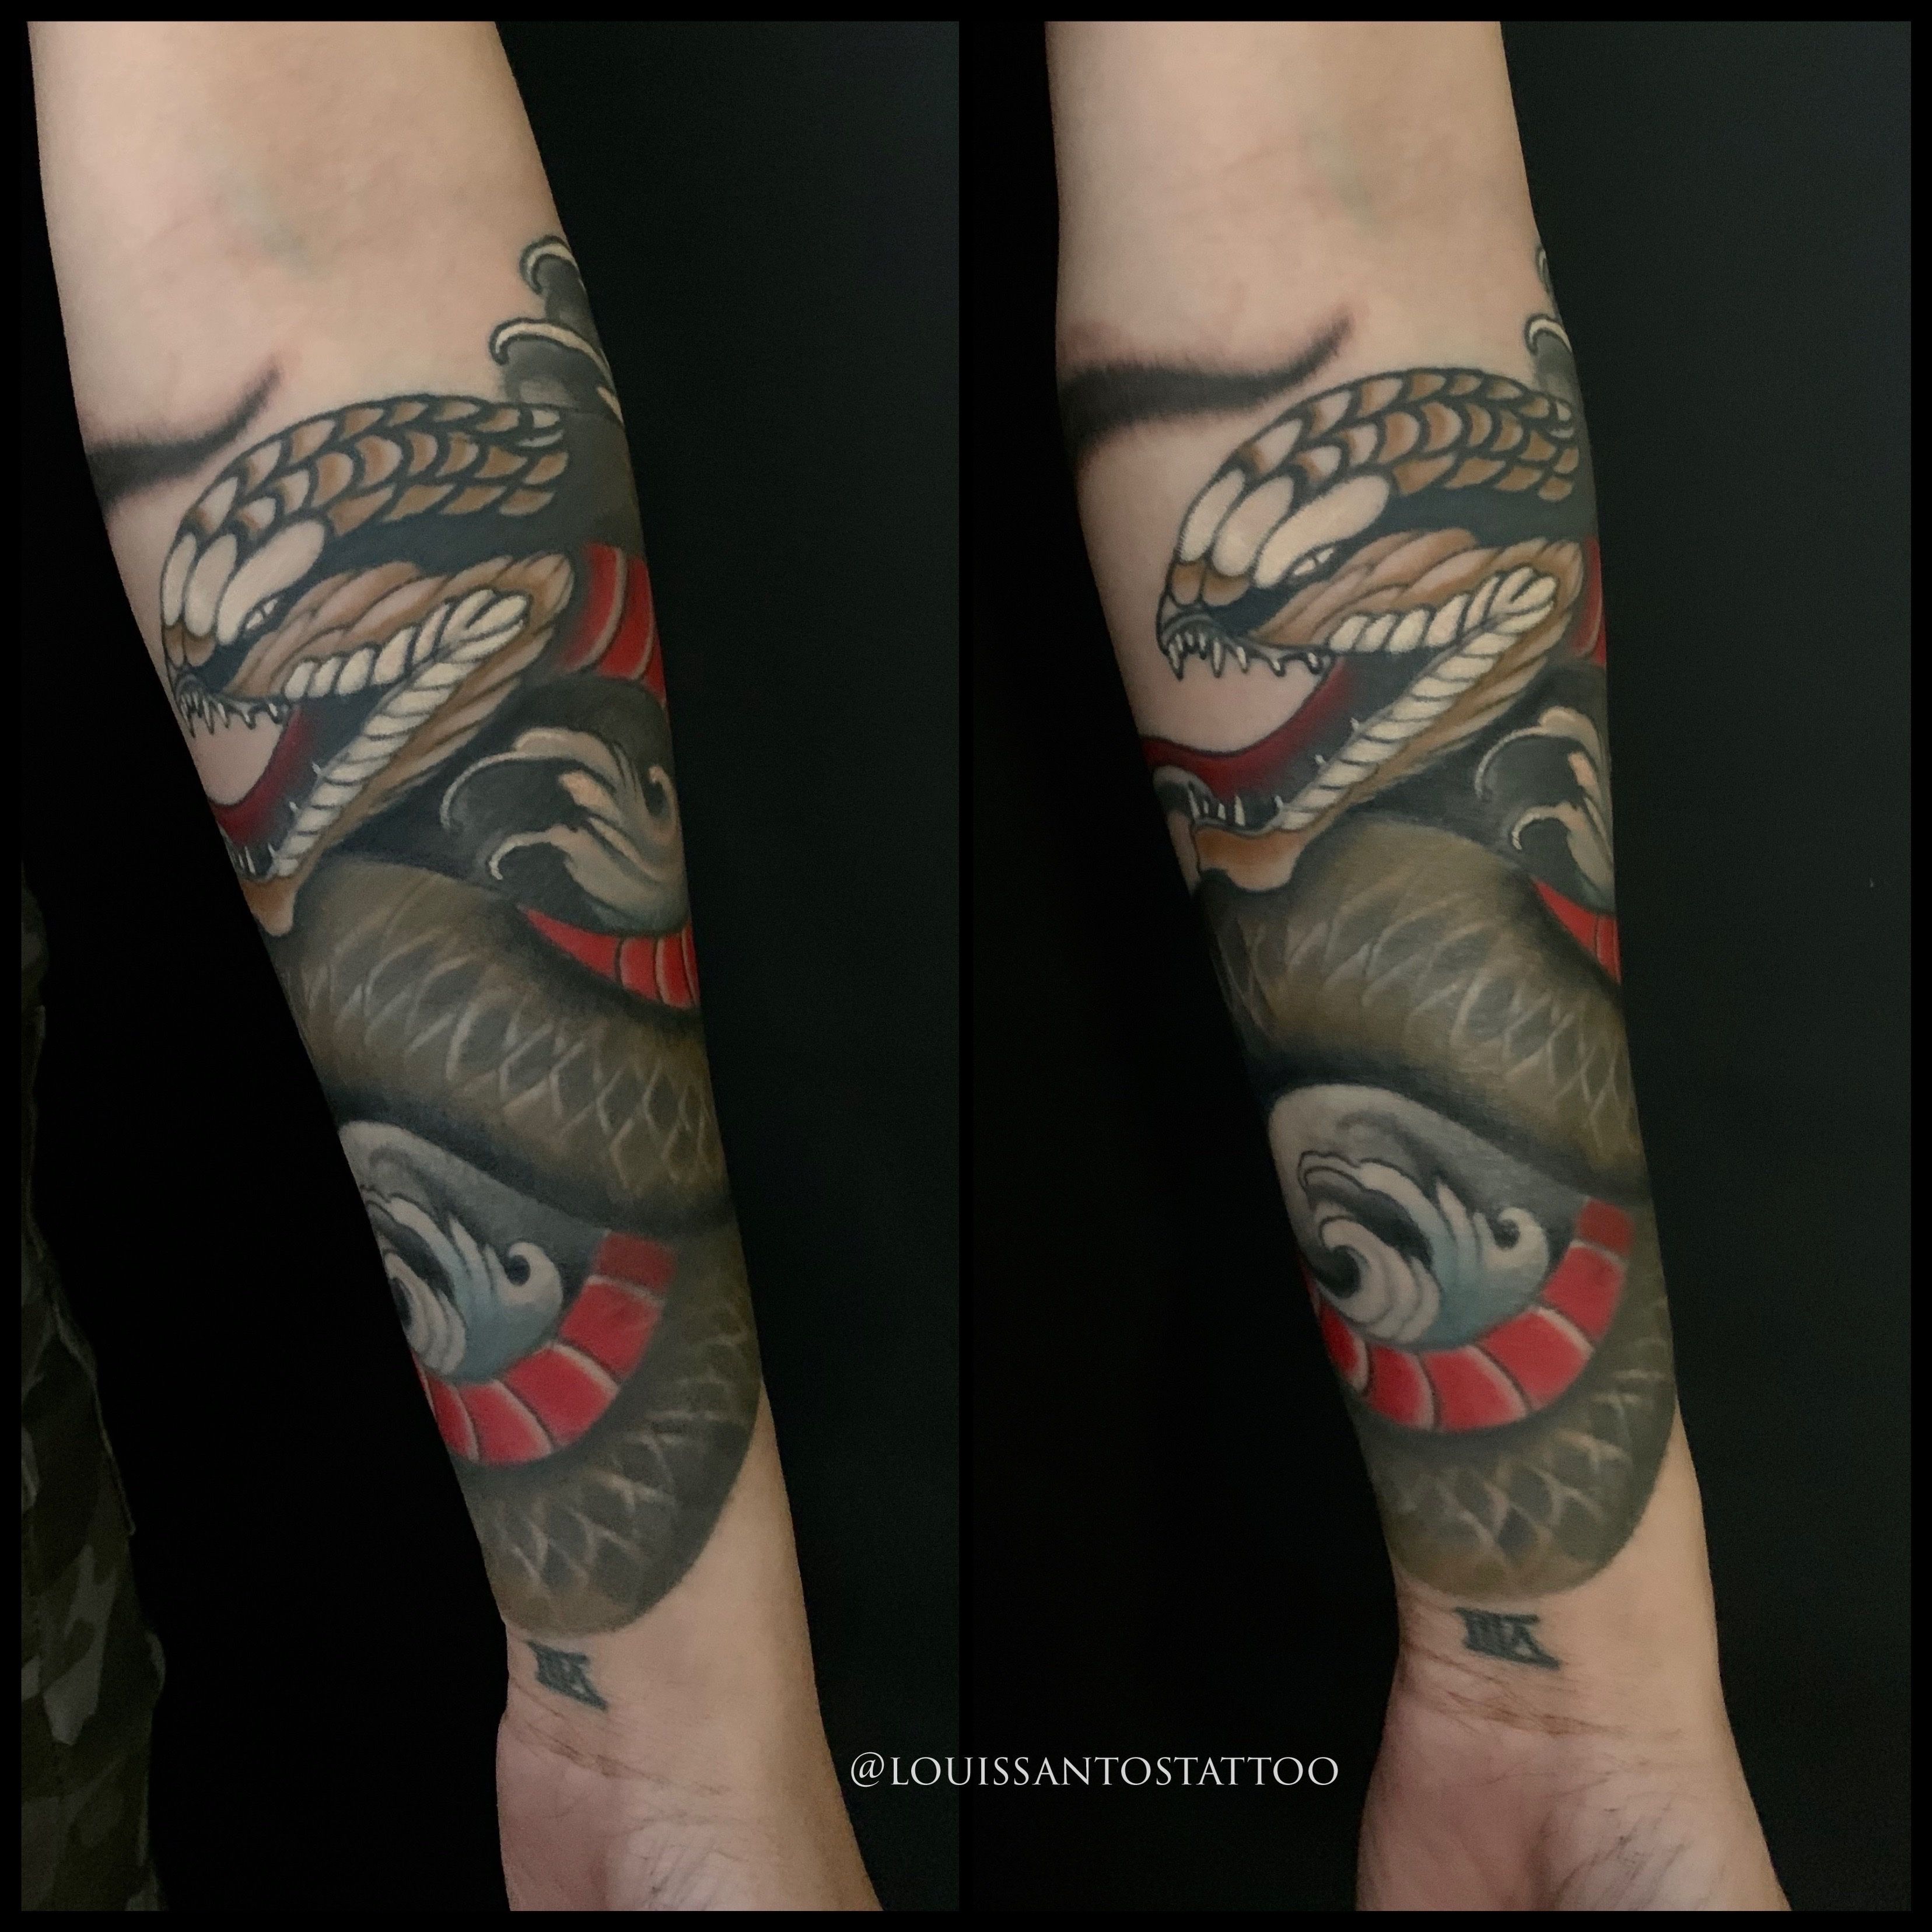 ALL DAY Tattoo BKK - Dynamite looking traditional Japanese forearm piece.  Tattoo by Jong. | Facebook